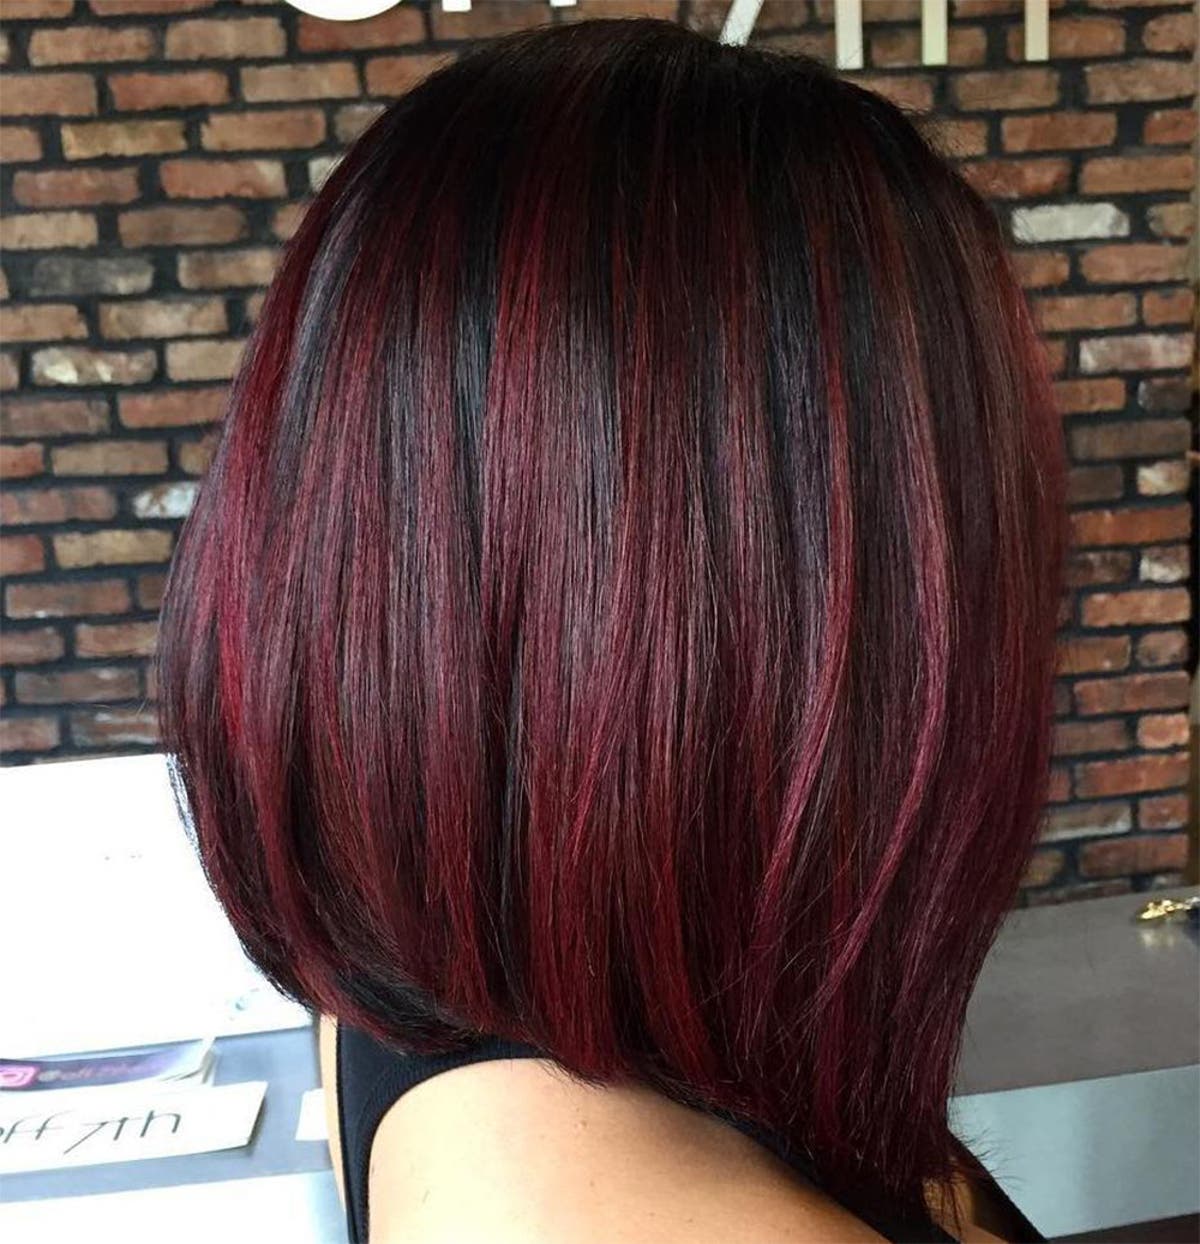 Black Cherry Hair Color Idea How To Rock Black Cherry Hair With Style